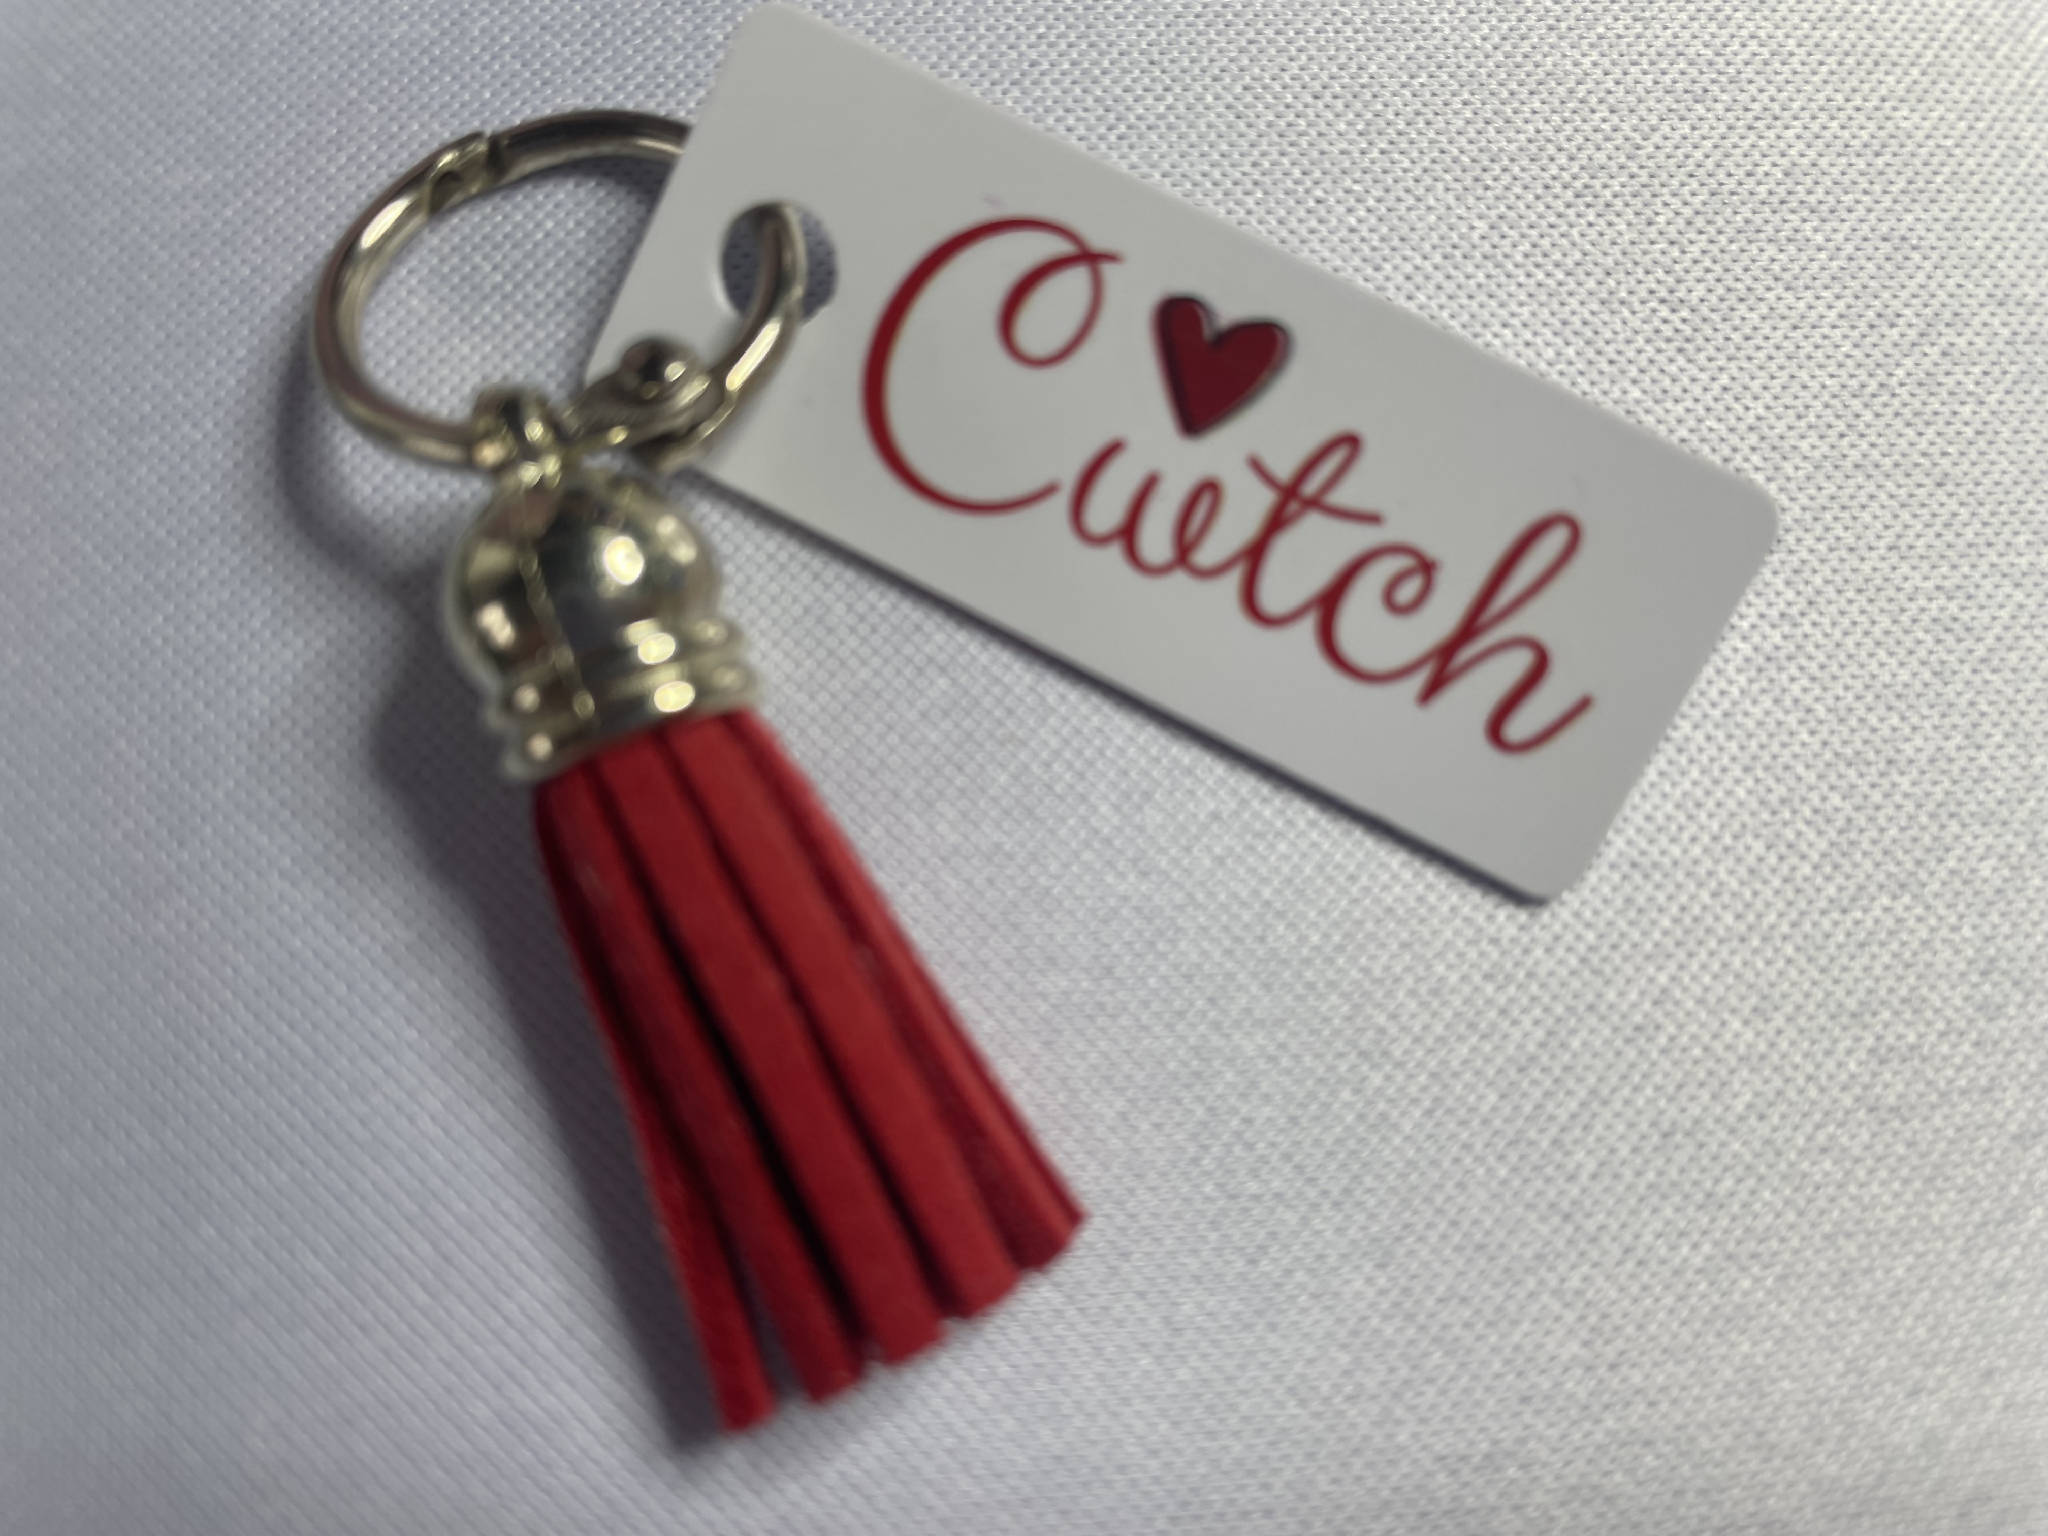 Cwtch keyring can be personalised